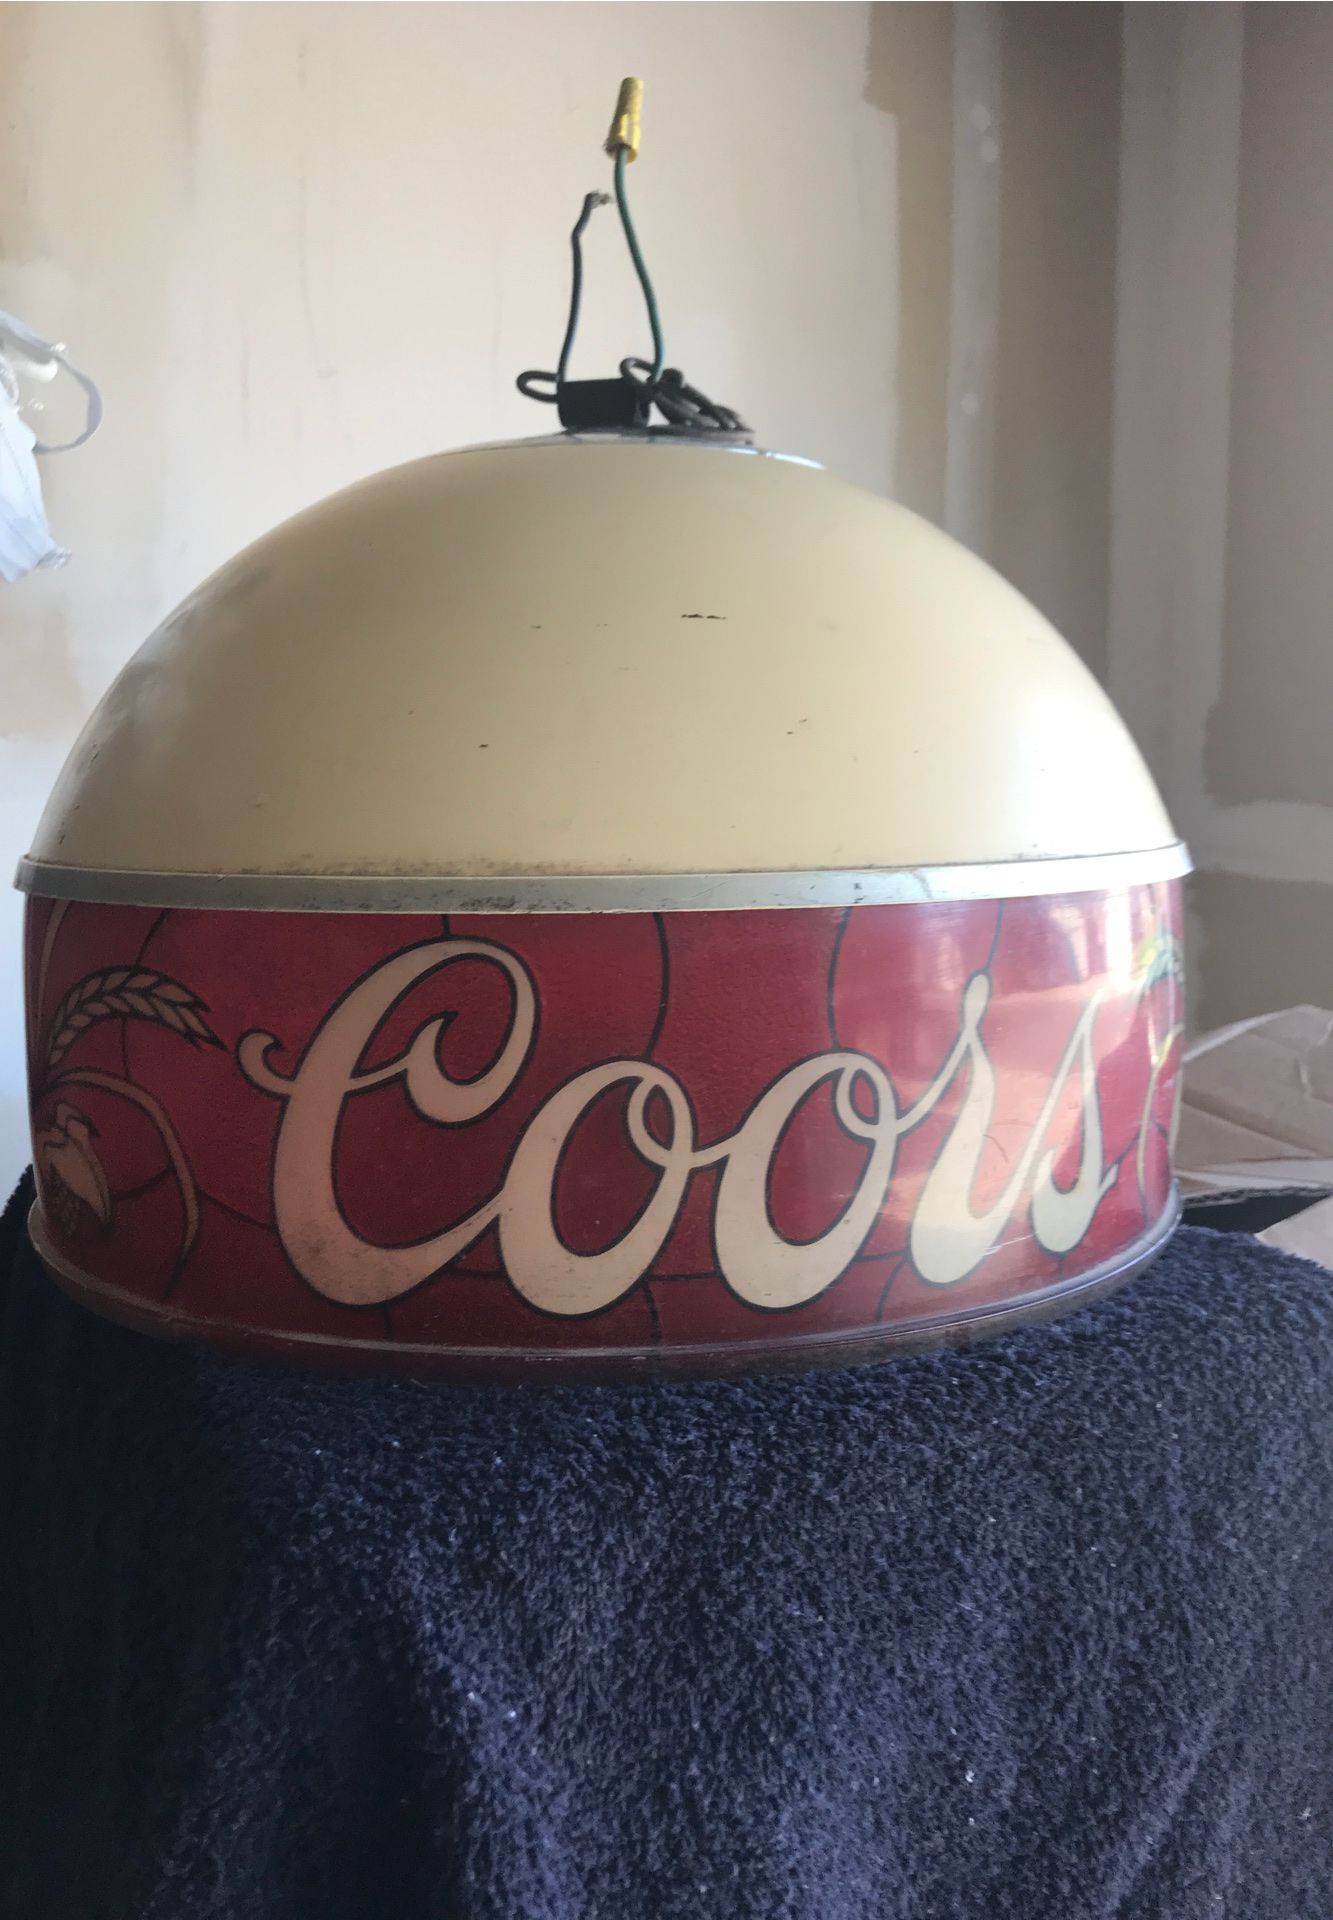 Antique Coors hanging ceiling lamp. Serious buyer only. No delivery